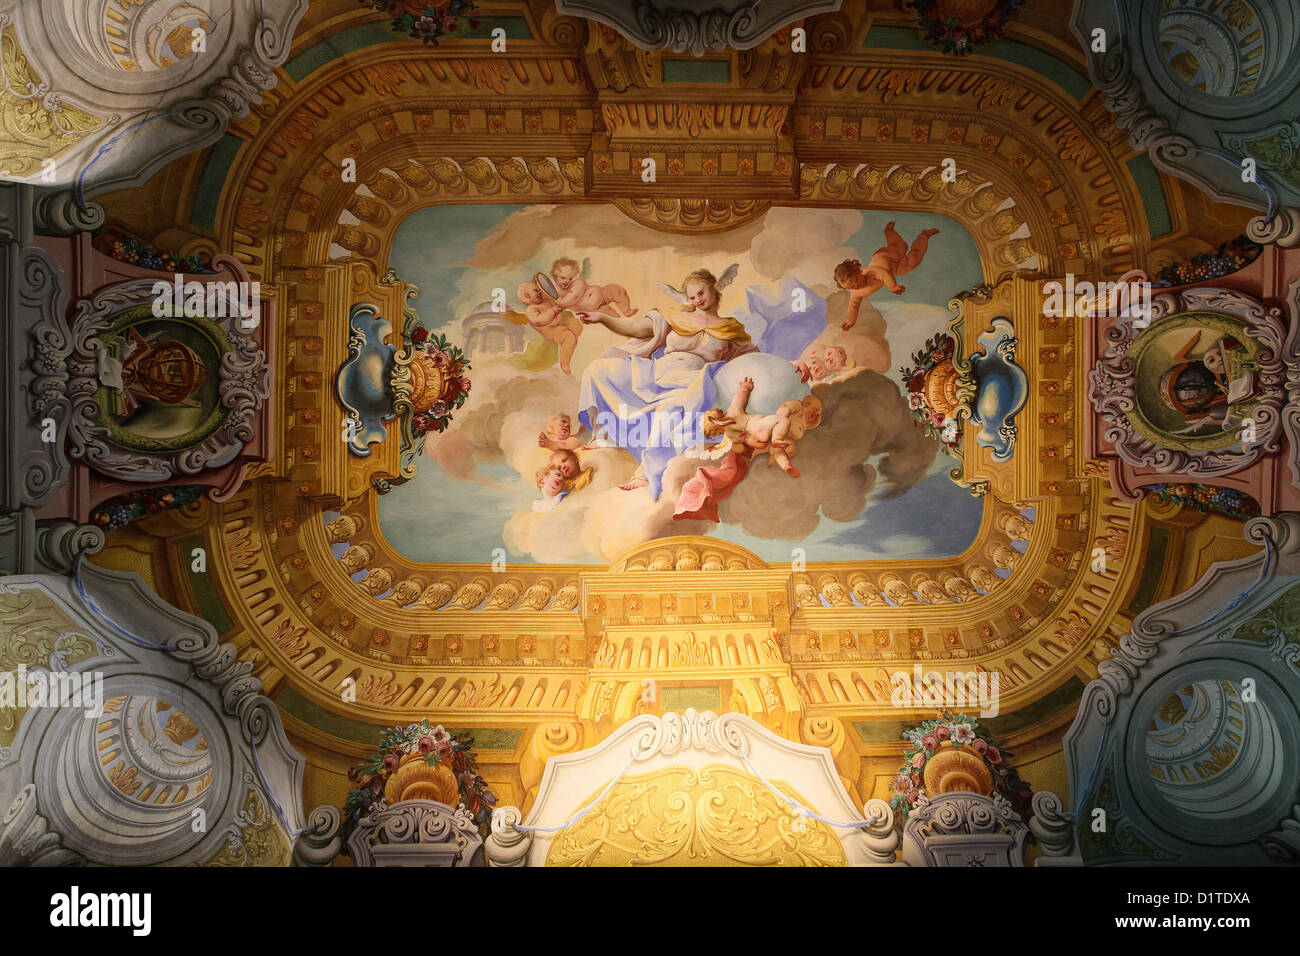 Ceiling fresco in the famous library of Stift Melk monastery in Austria. Stock Photo